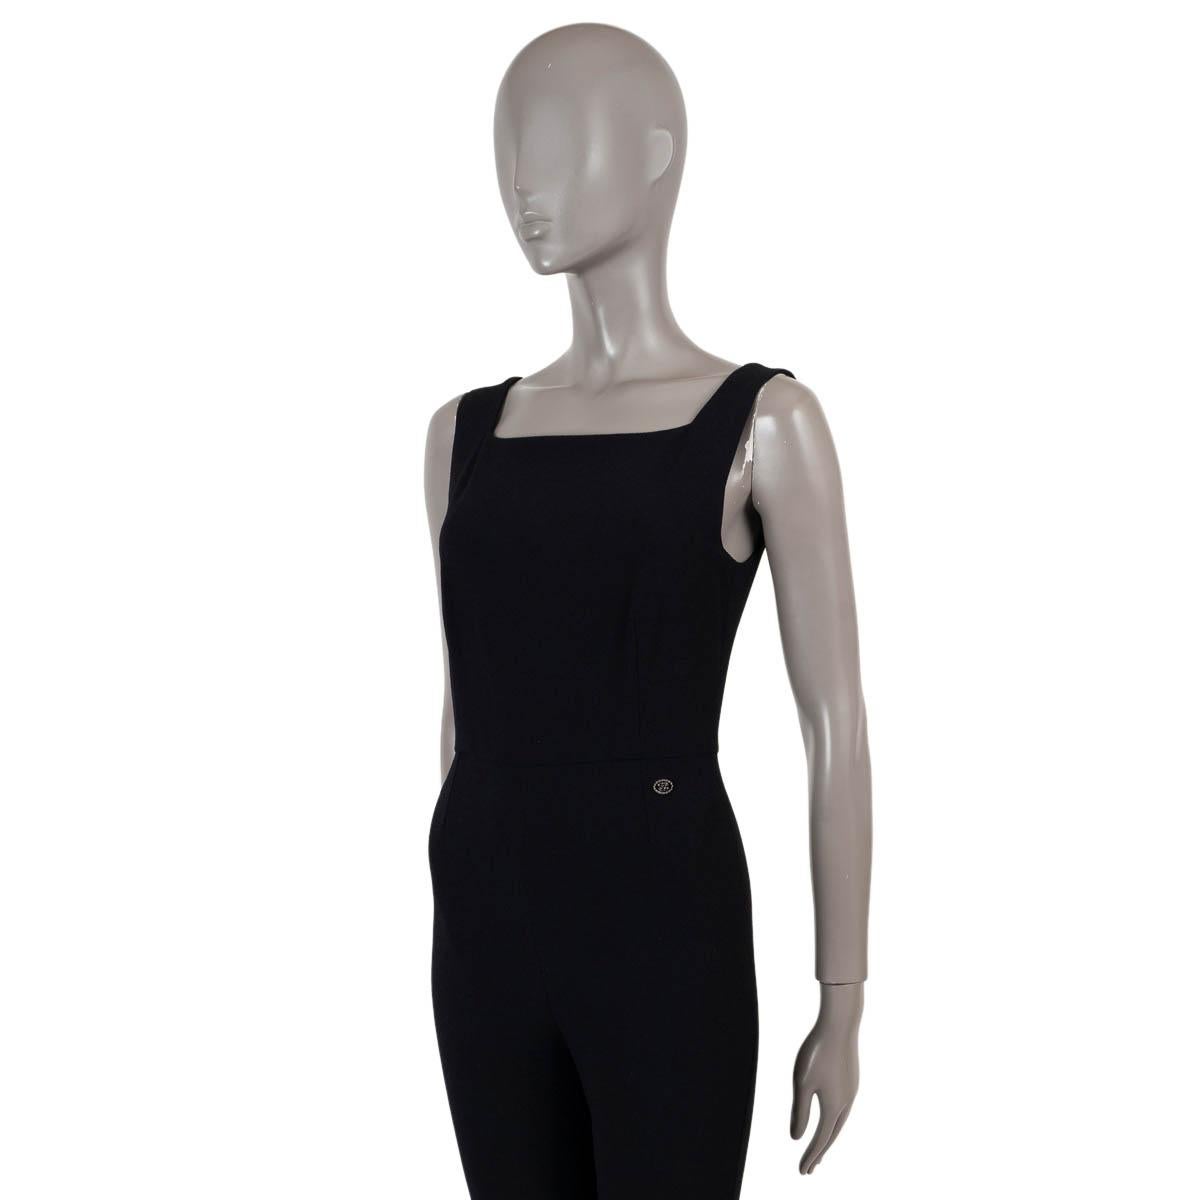 100% authentic Chanel stretchy crepe cropped jumpsuit in black viscose (95%) and elastane (5%). Opens with a zipper on the back and is lined in silk (91%) and elastane (9%). Has been worn and is in excellent condition. Comes with tag. 

2019